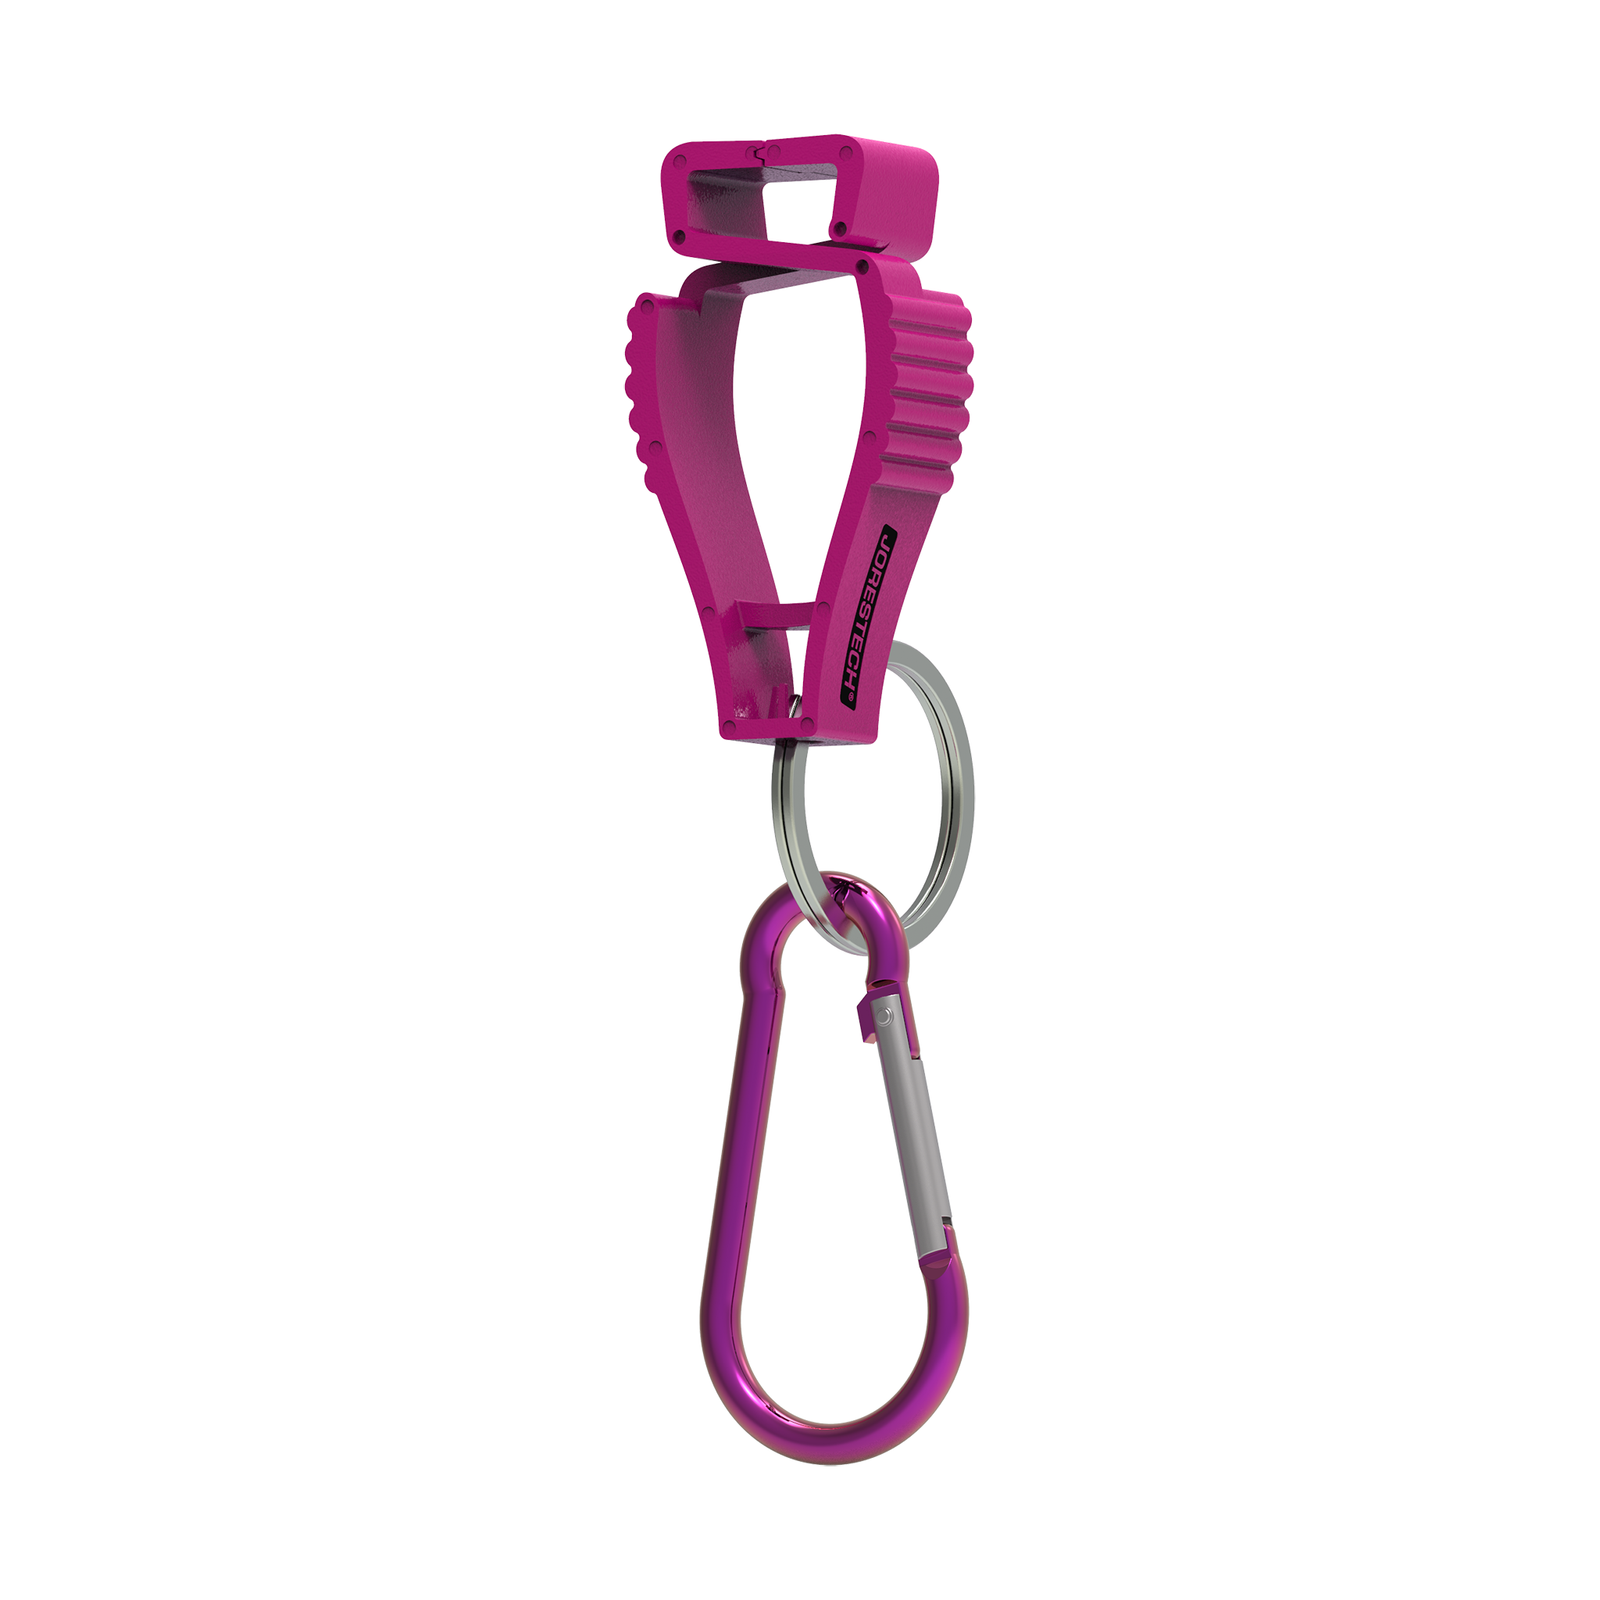 Pink JORESTECH glove clip safety holders with carabiner